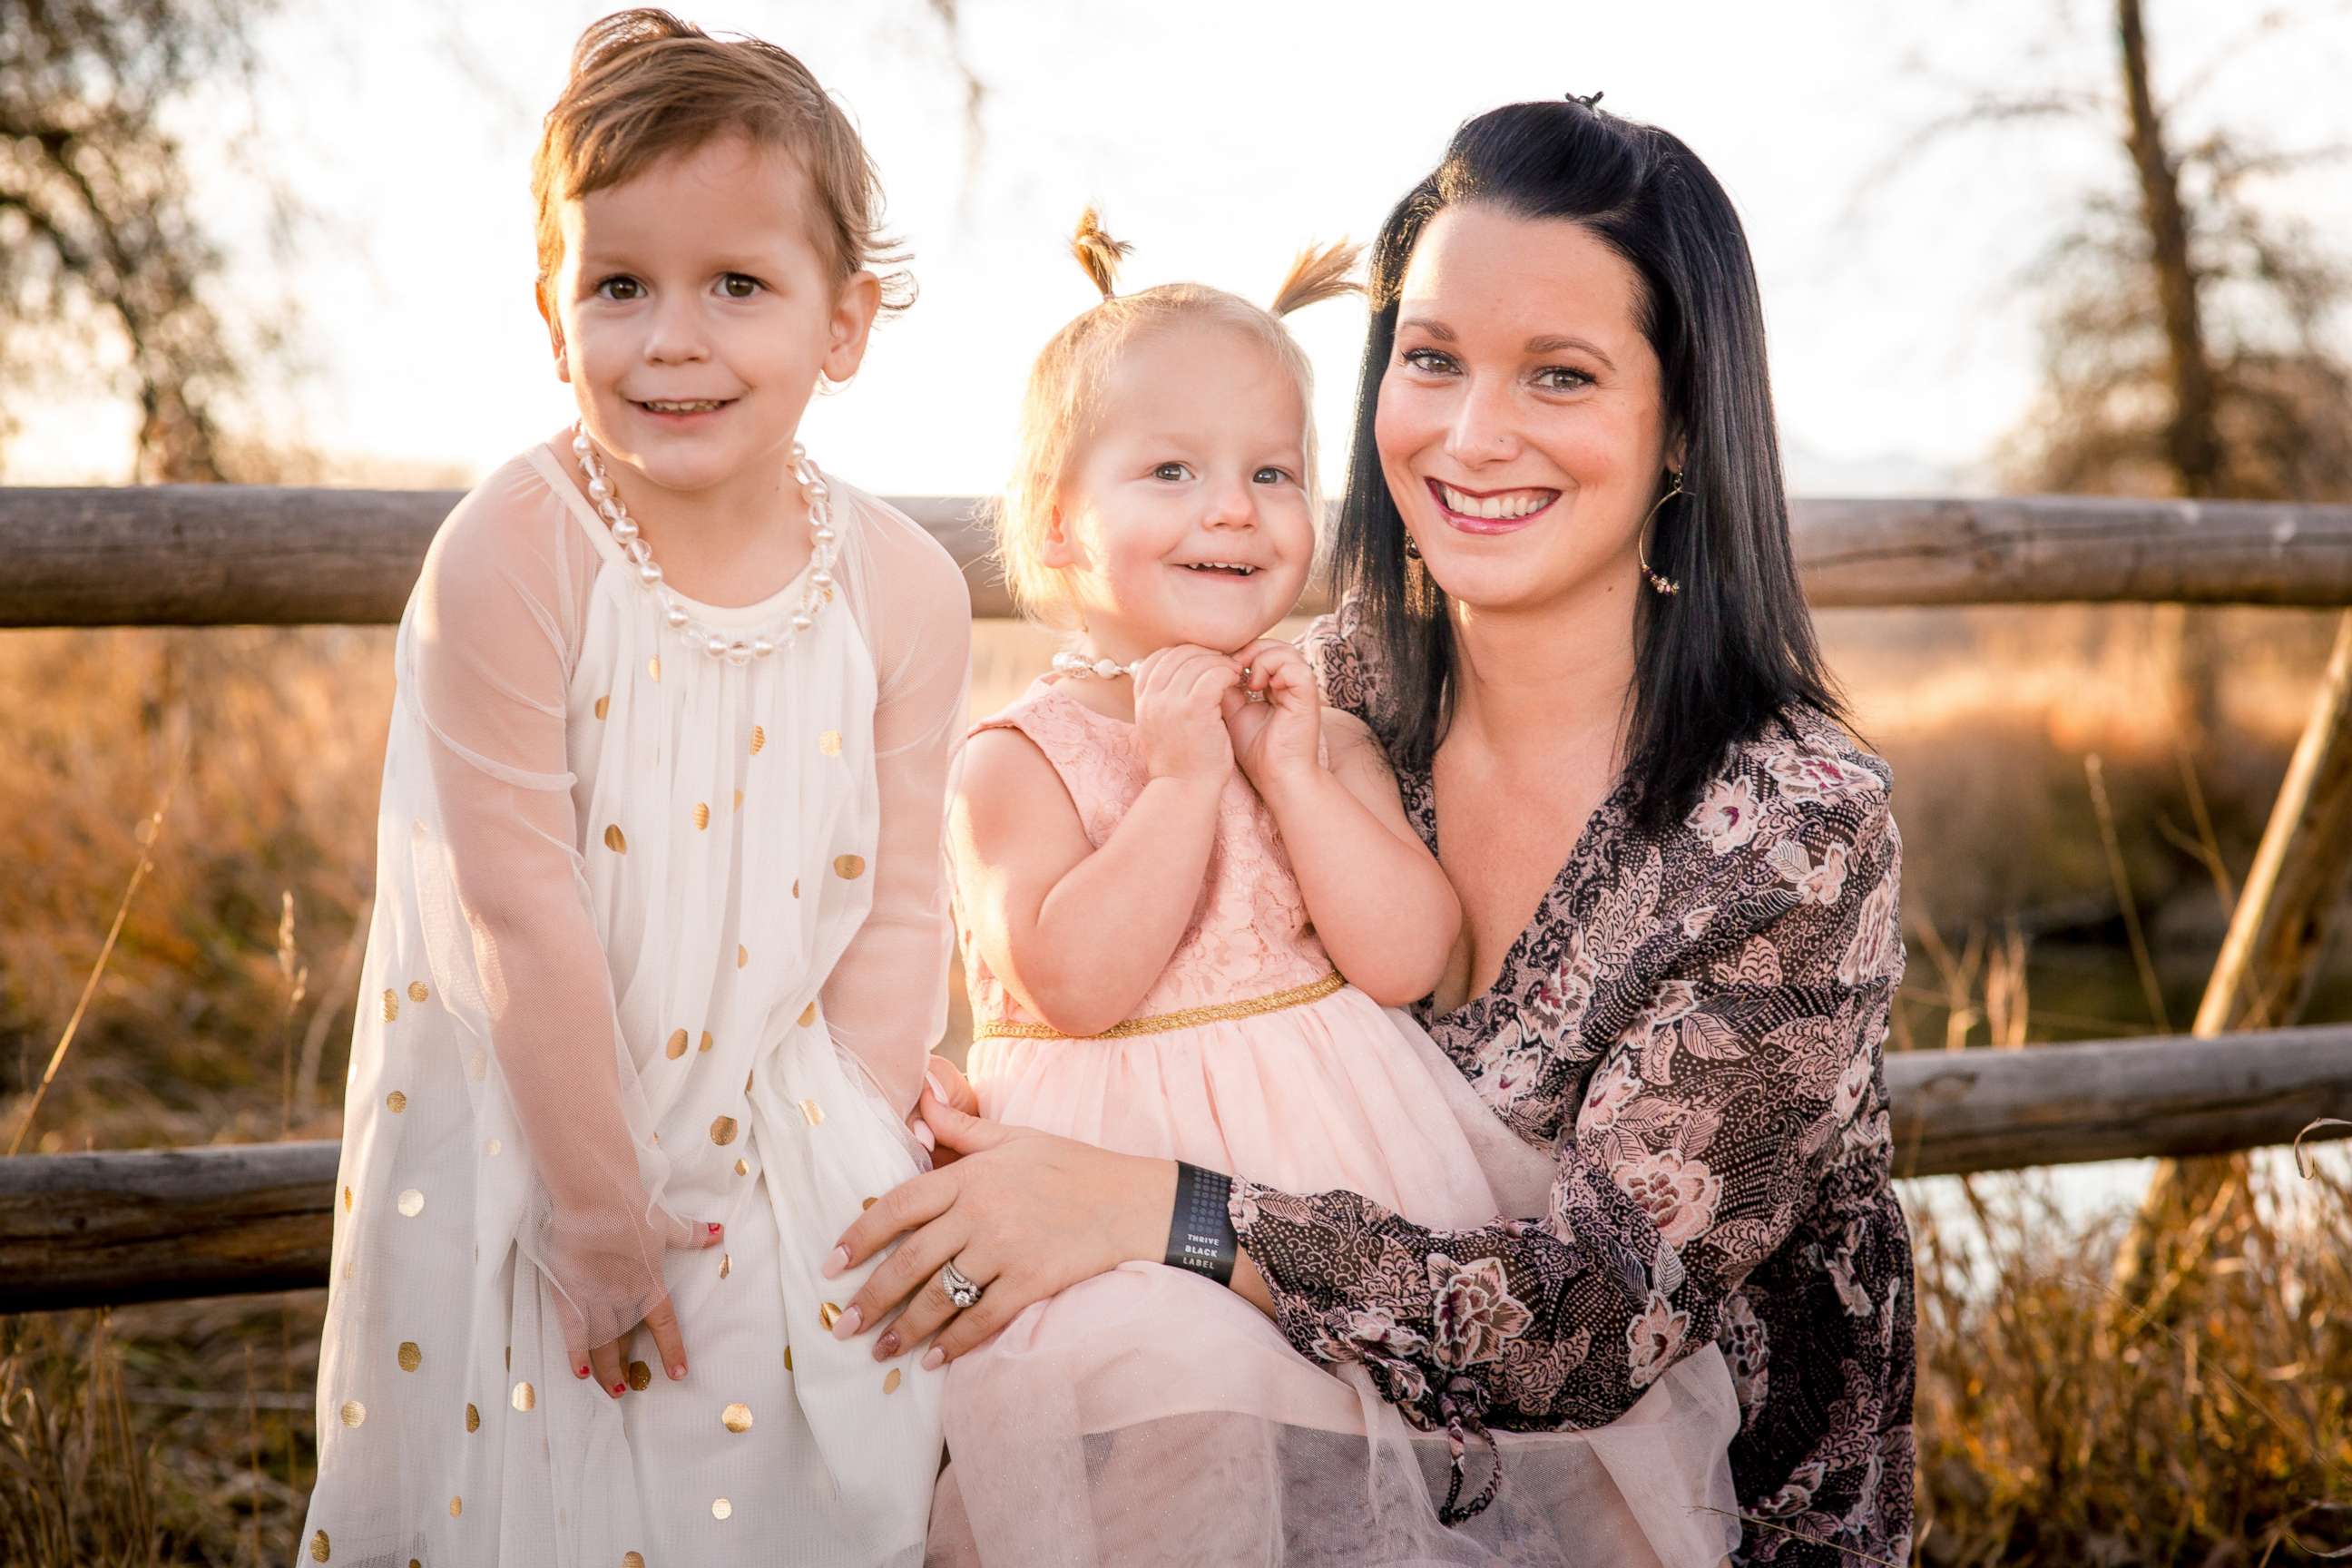 PHOTO: Shanann Watts, 34, and her daughters Celeste, 3 and Bella, 4.